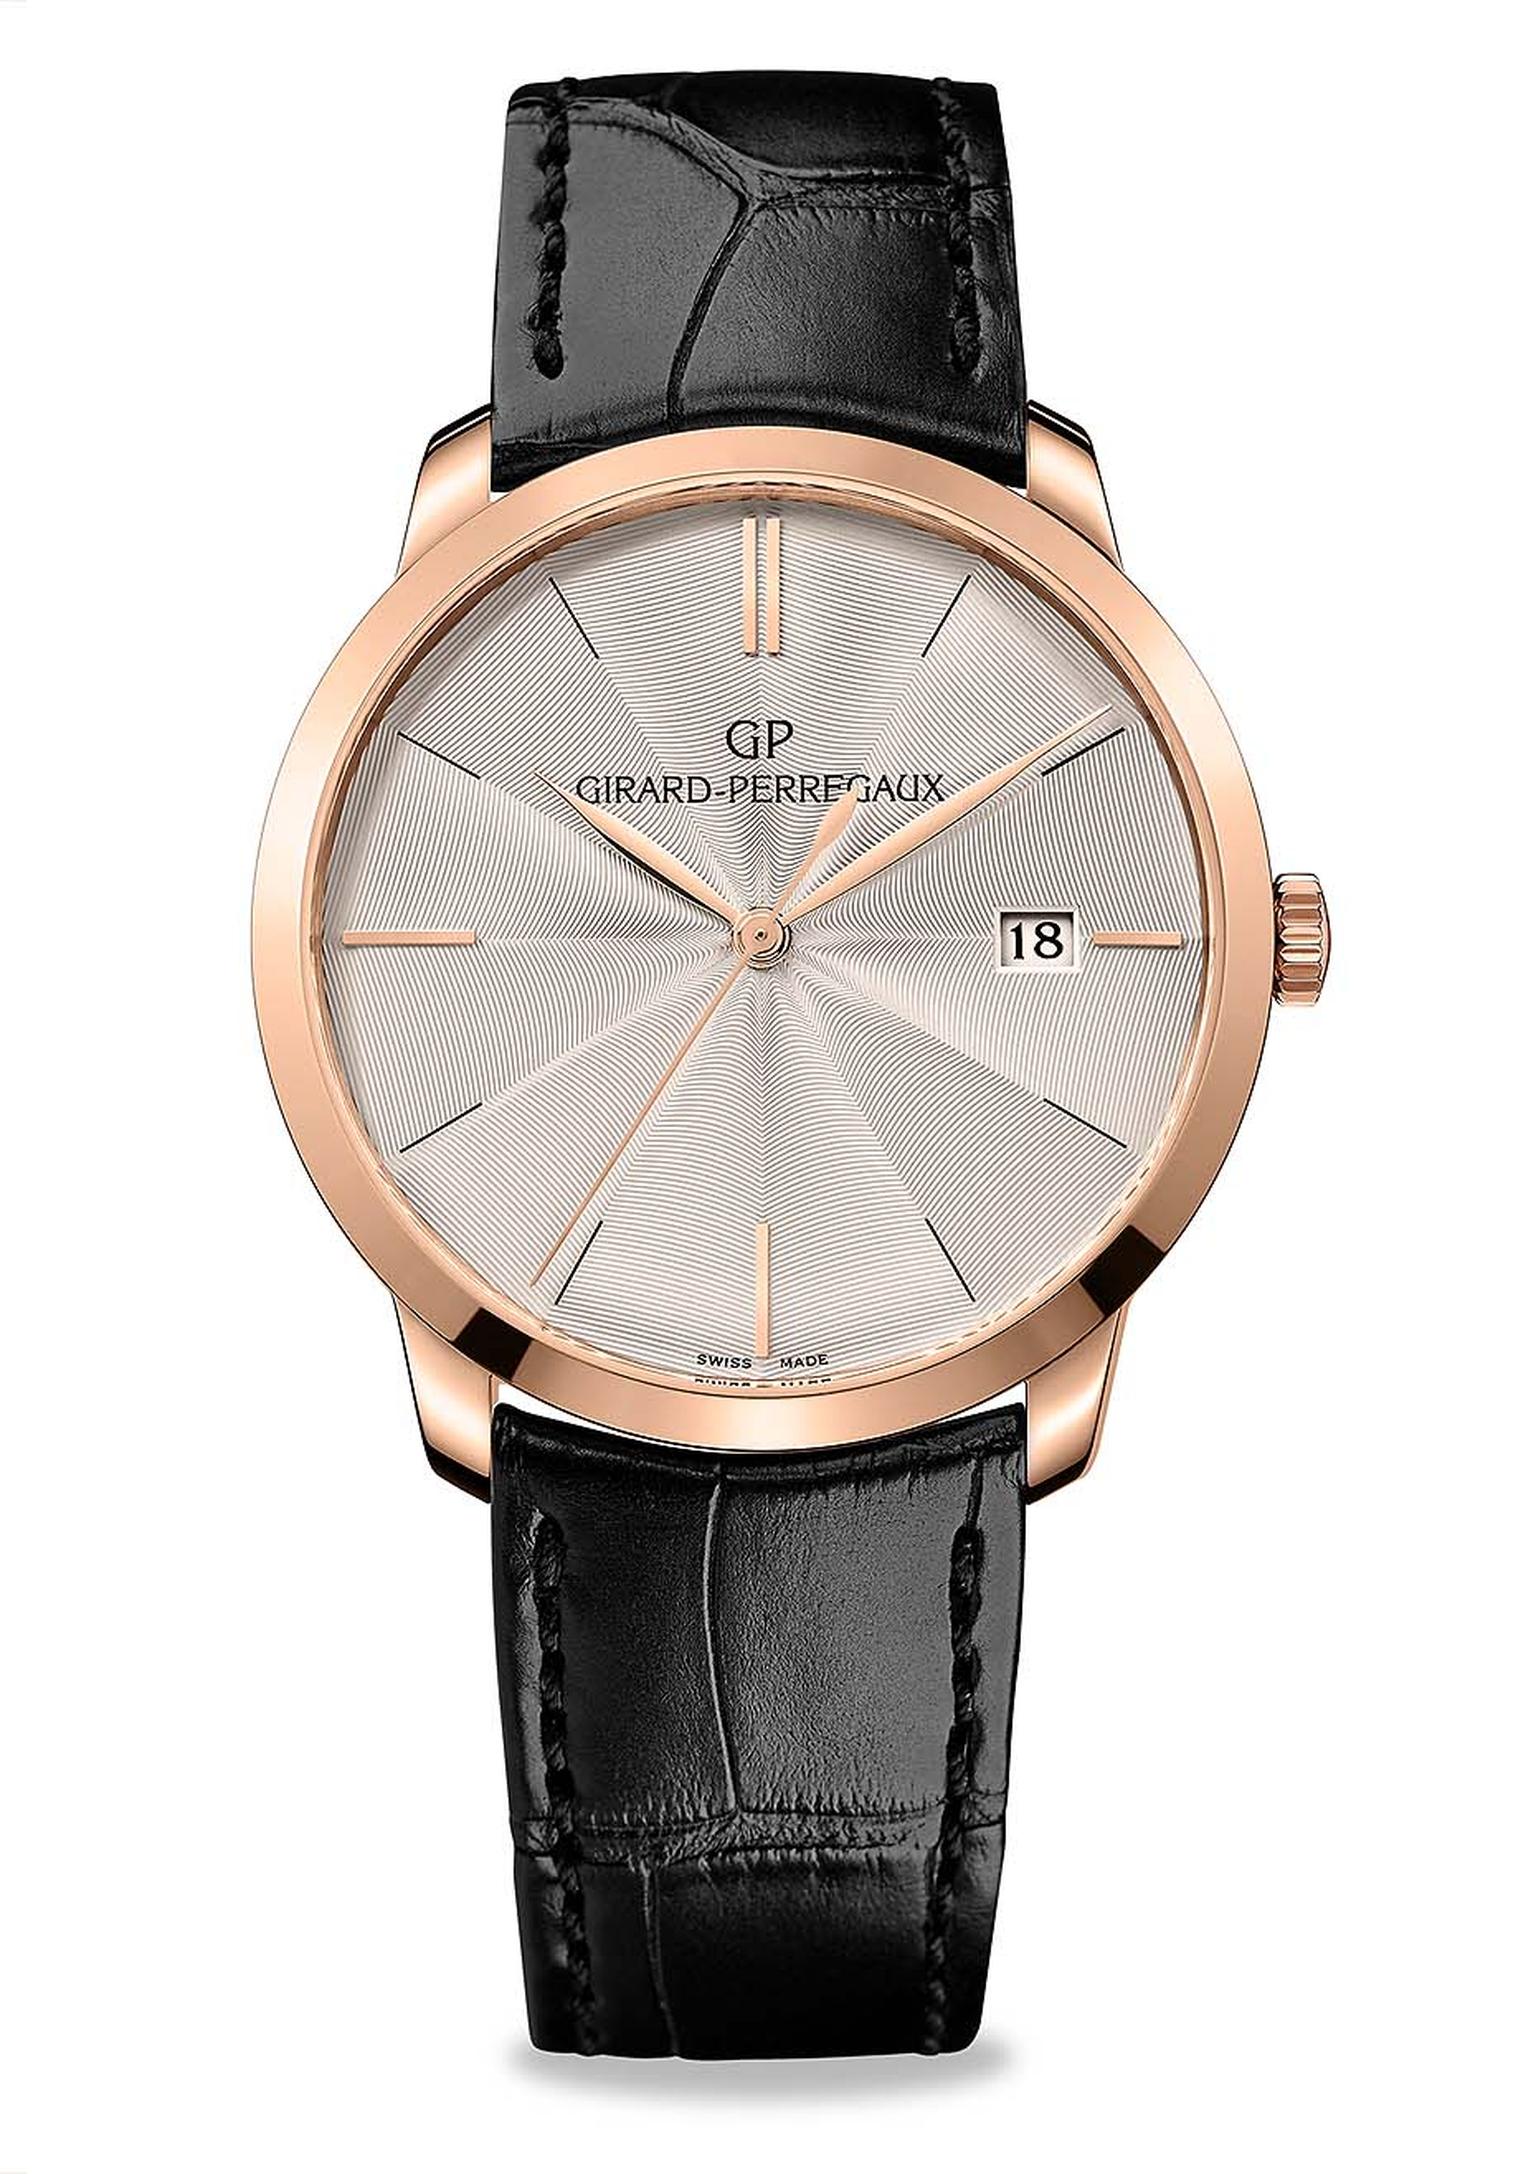 The new 1966 model from Girard-Perregaux watches, with a guilloché dial, comes in a 38mm rose gold case and beats to an in-house automatic GP calibre.